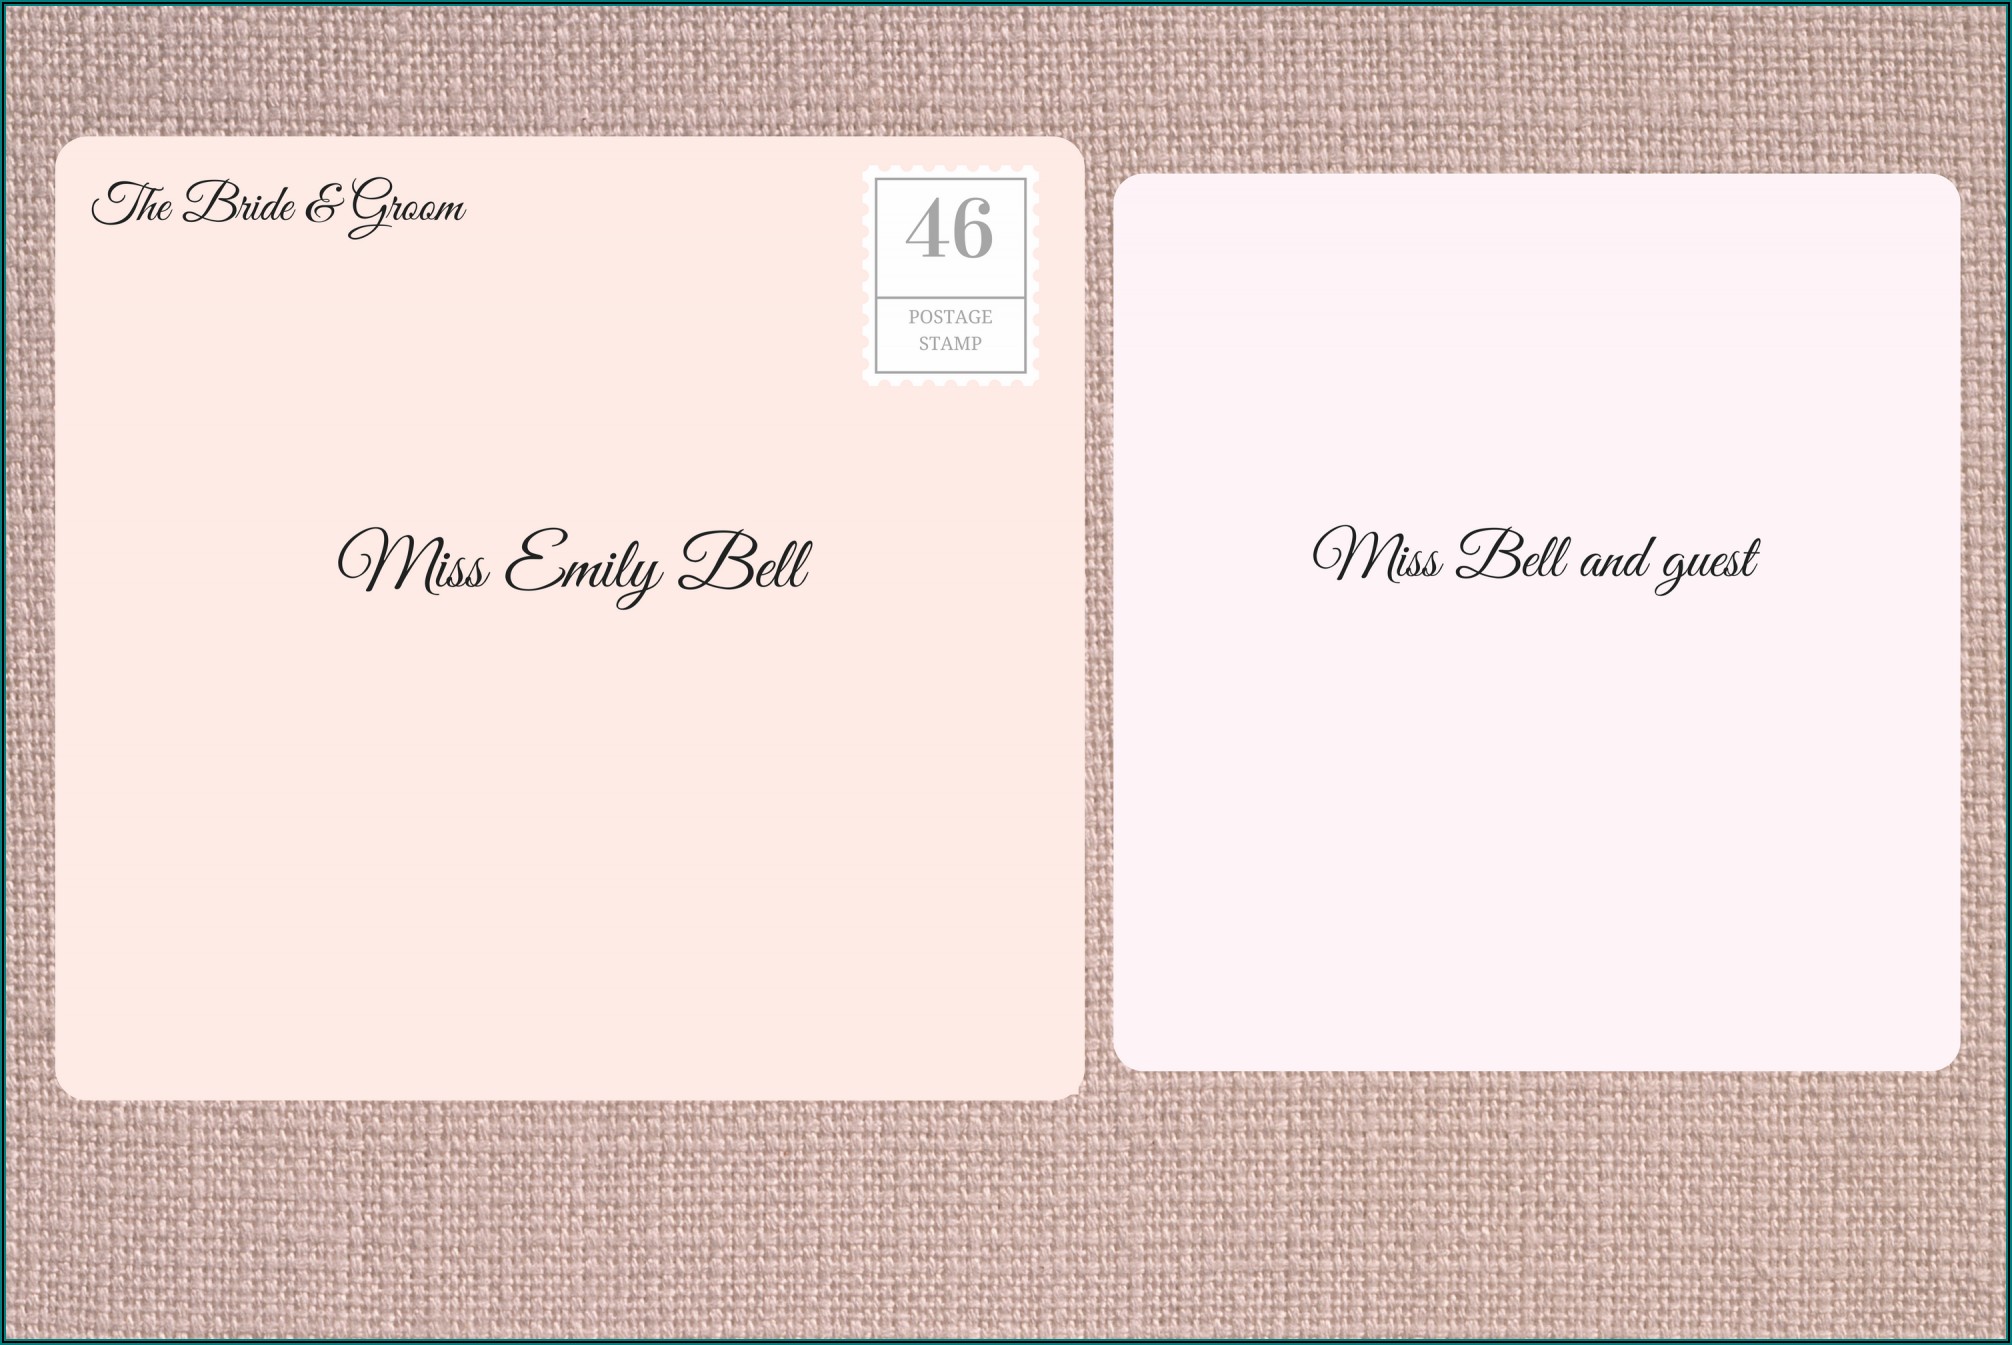 How Do You Address Wedding Invitations With Only One Envelope